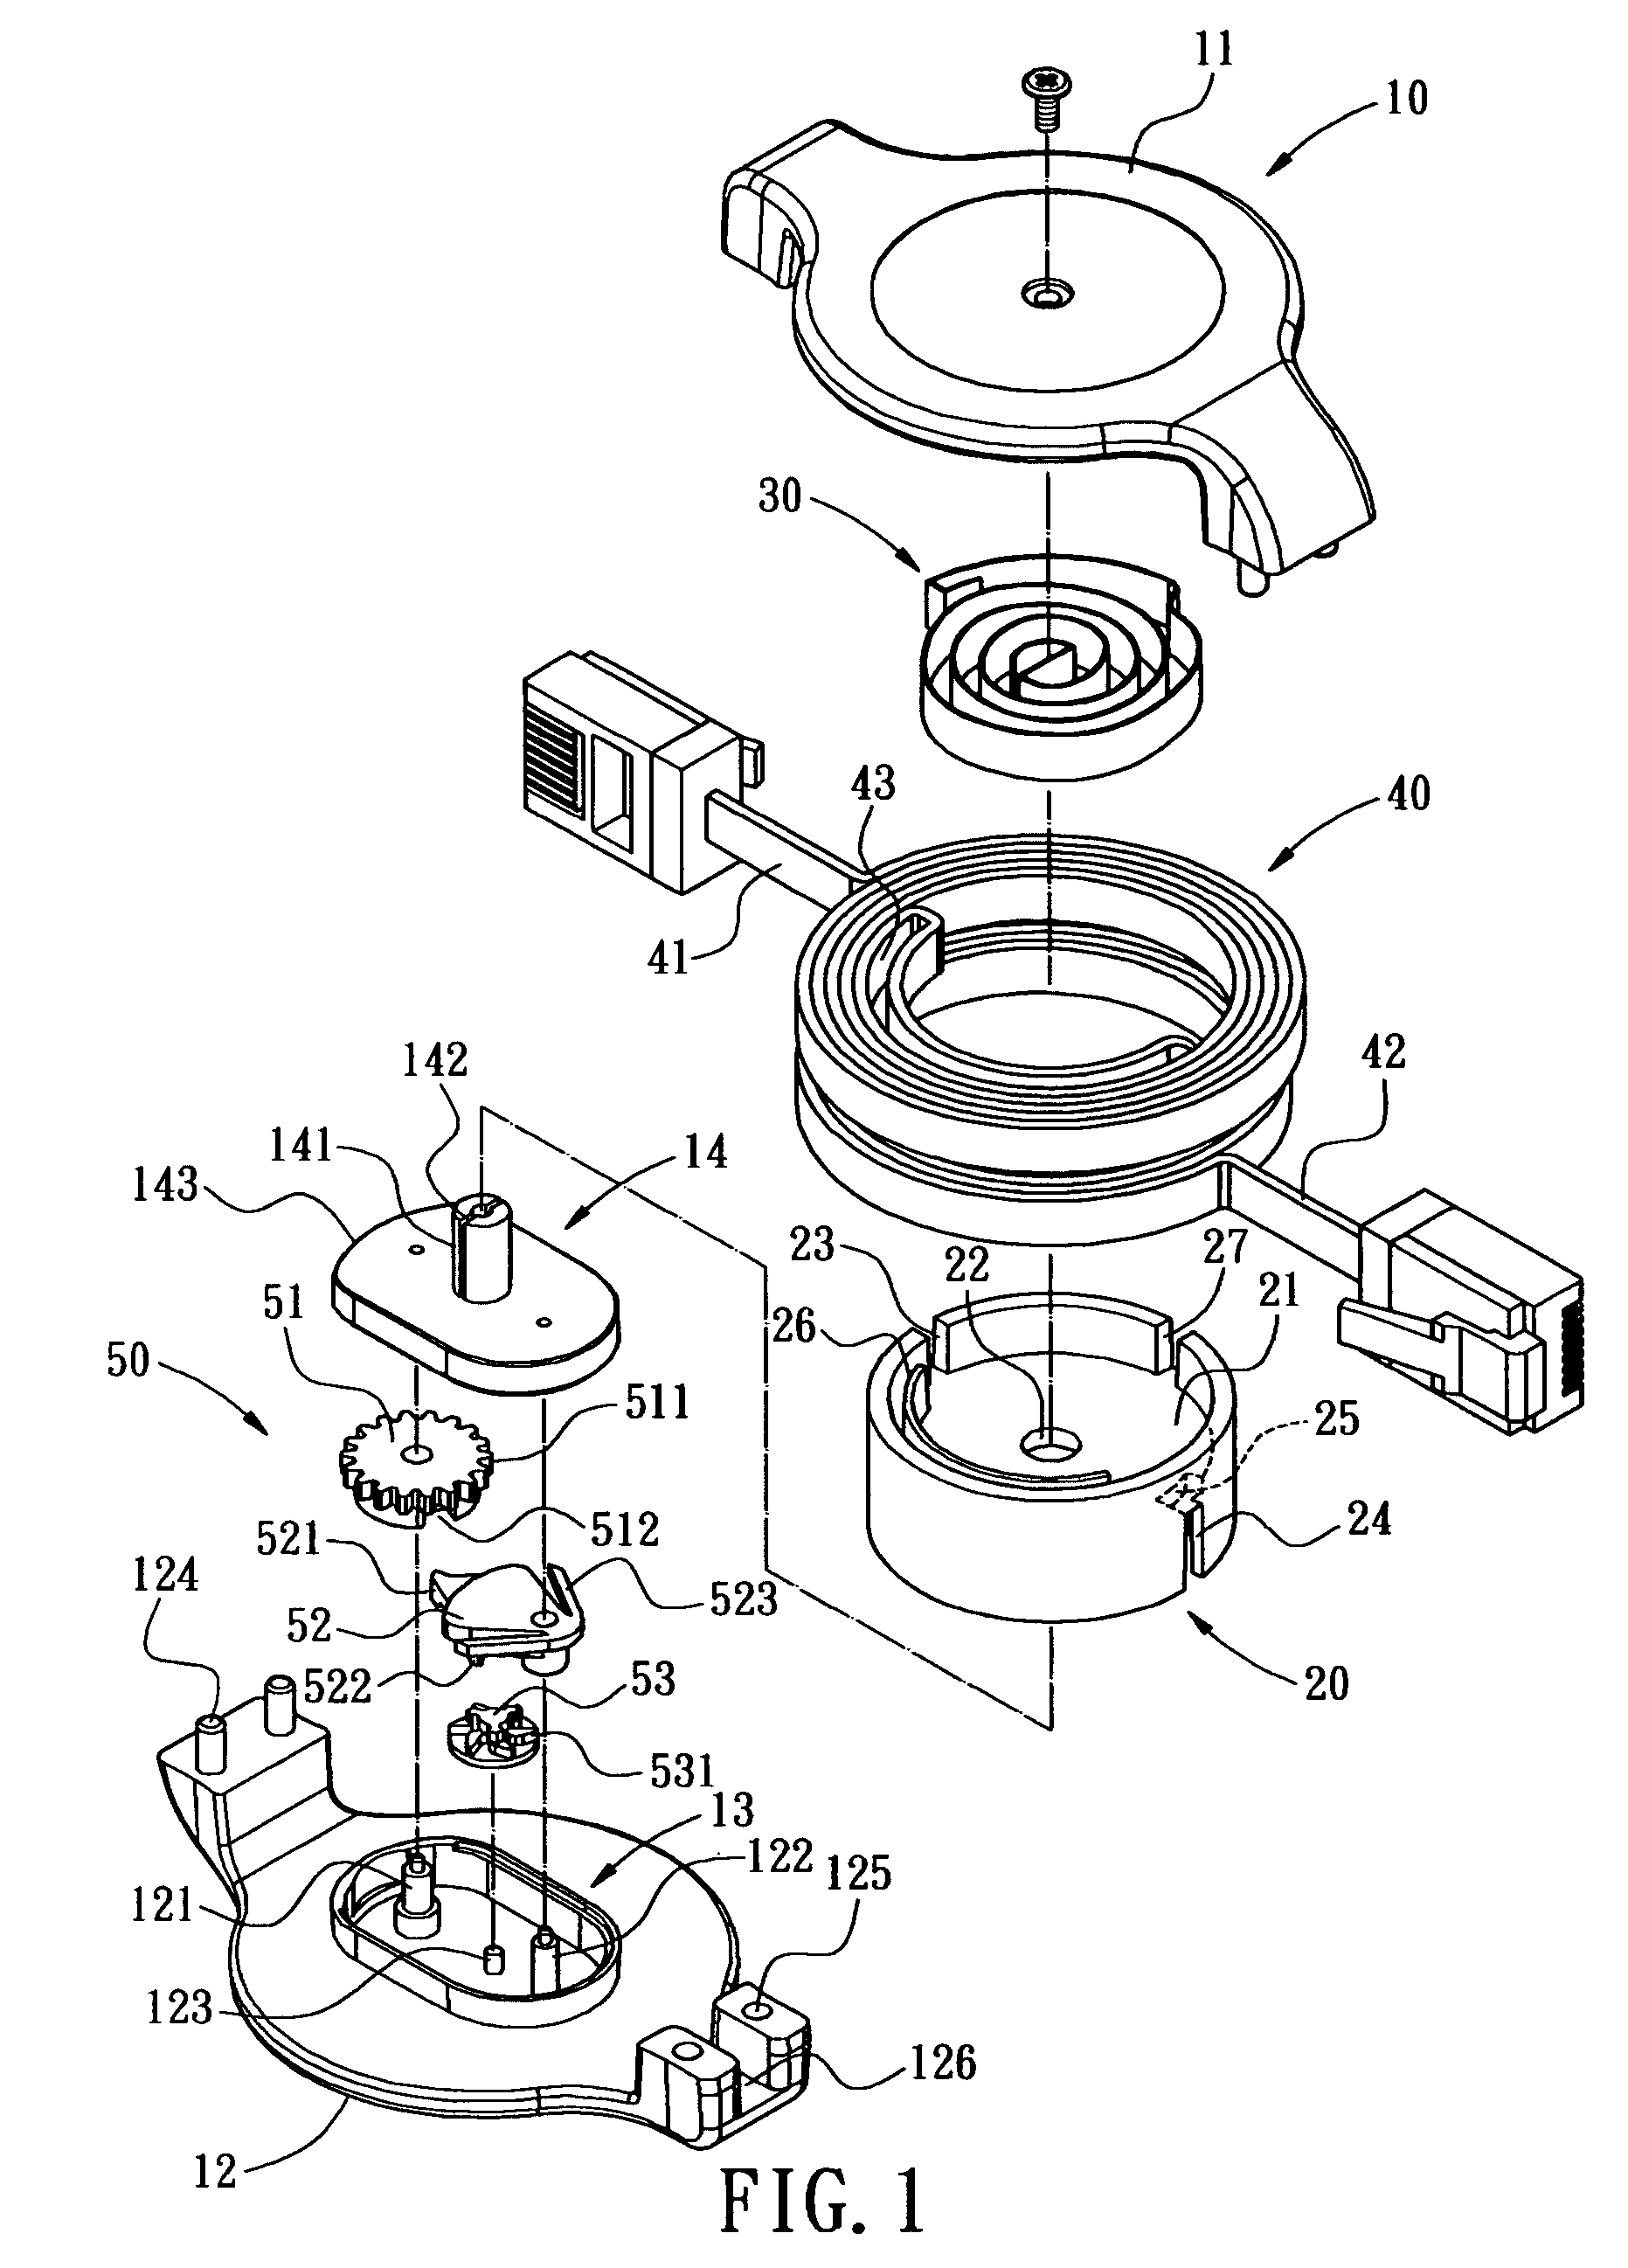 Cable winder apparatus